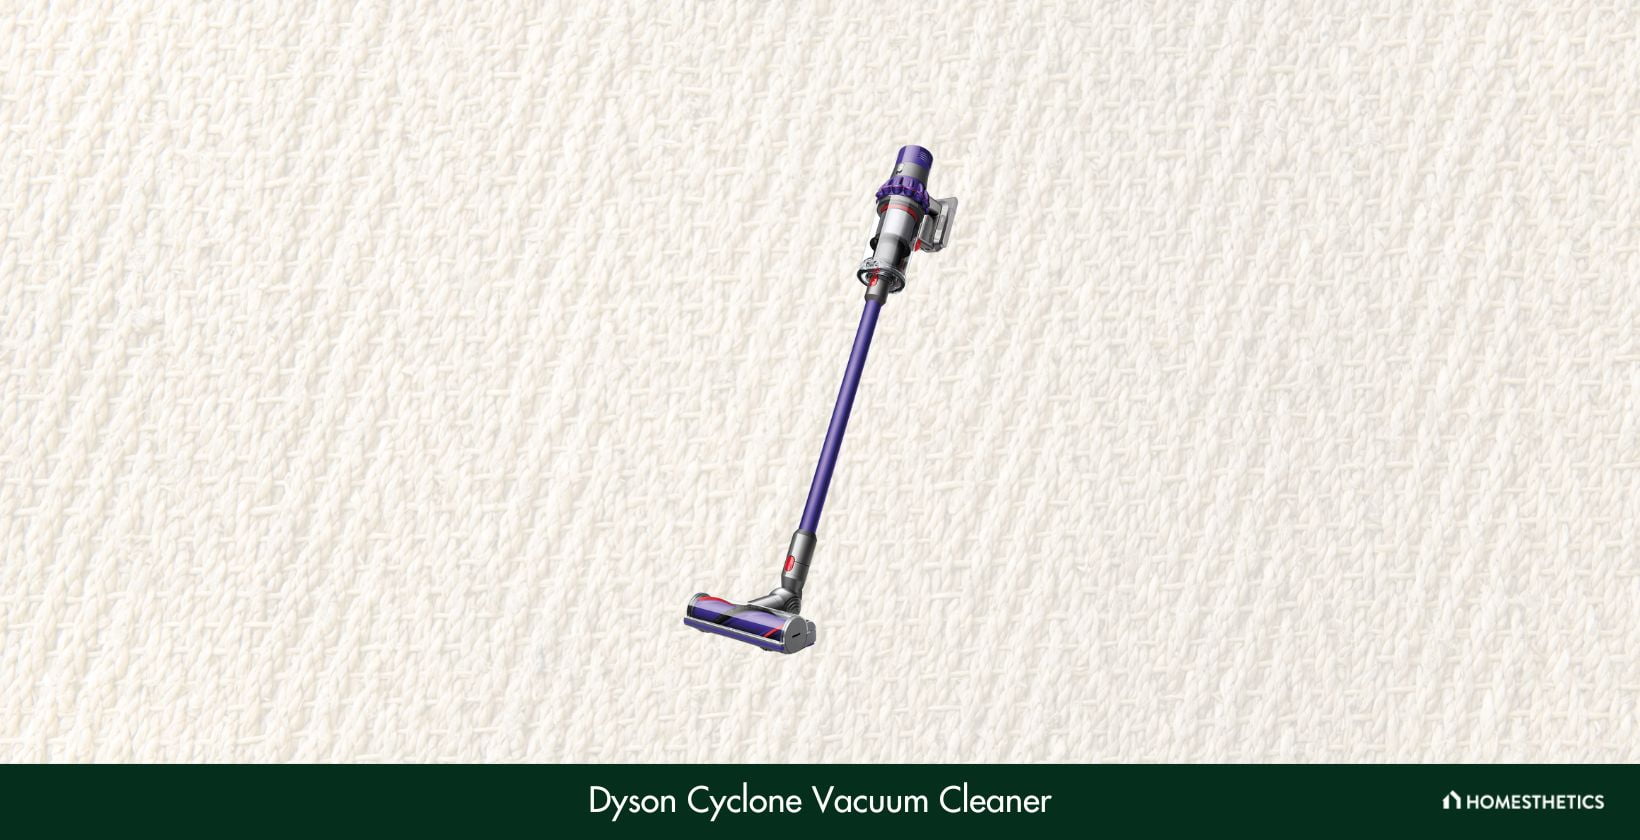 Dyson Cyclone Vacuum Cleaner